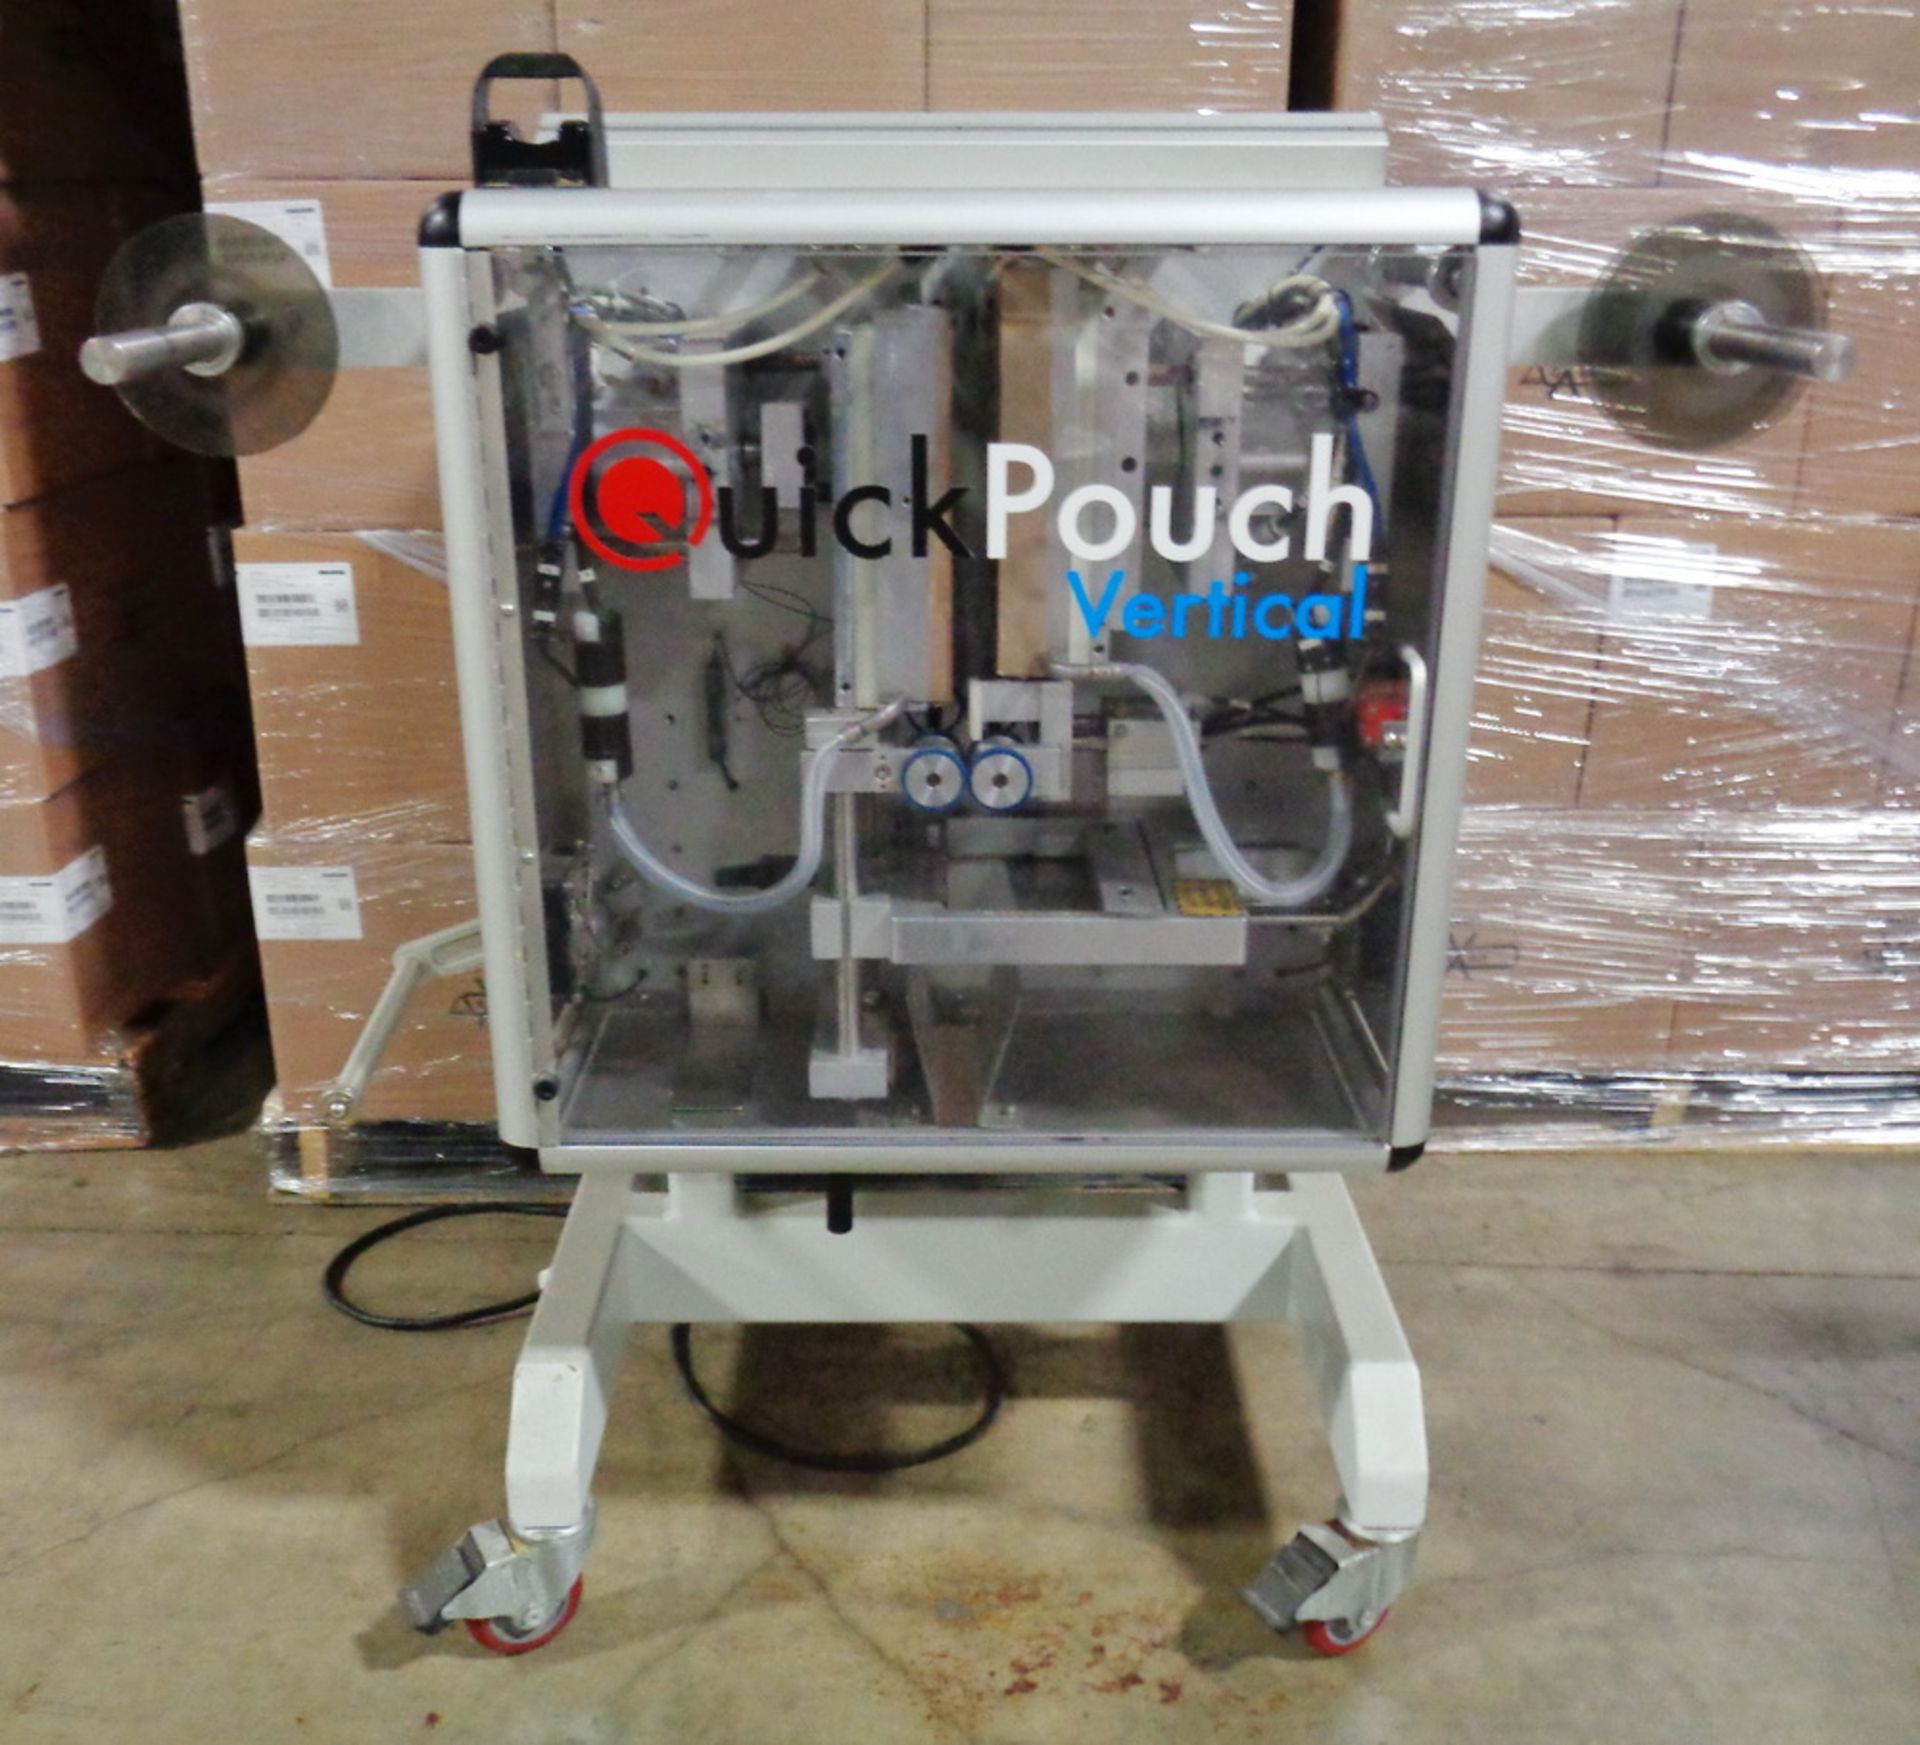 Quick Pouch Vertical Compact Pouch Form/Fill/Seal Machine, new 2011